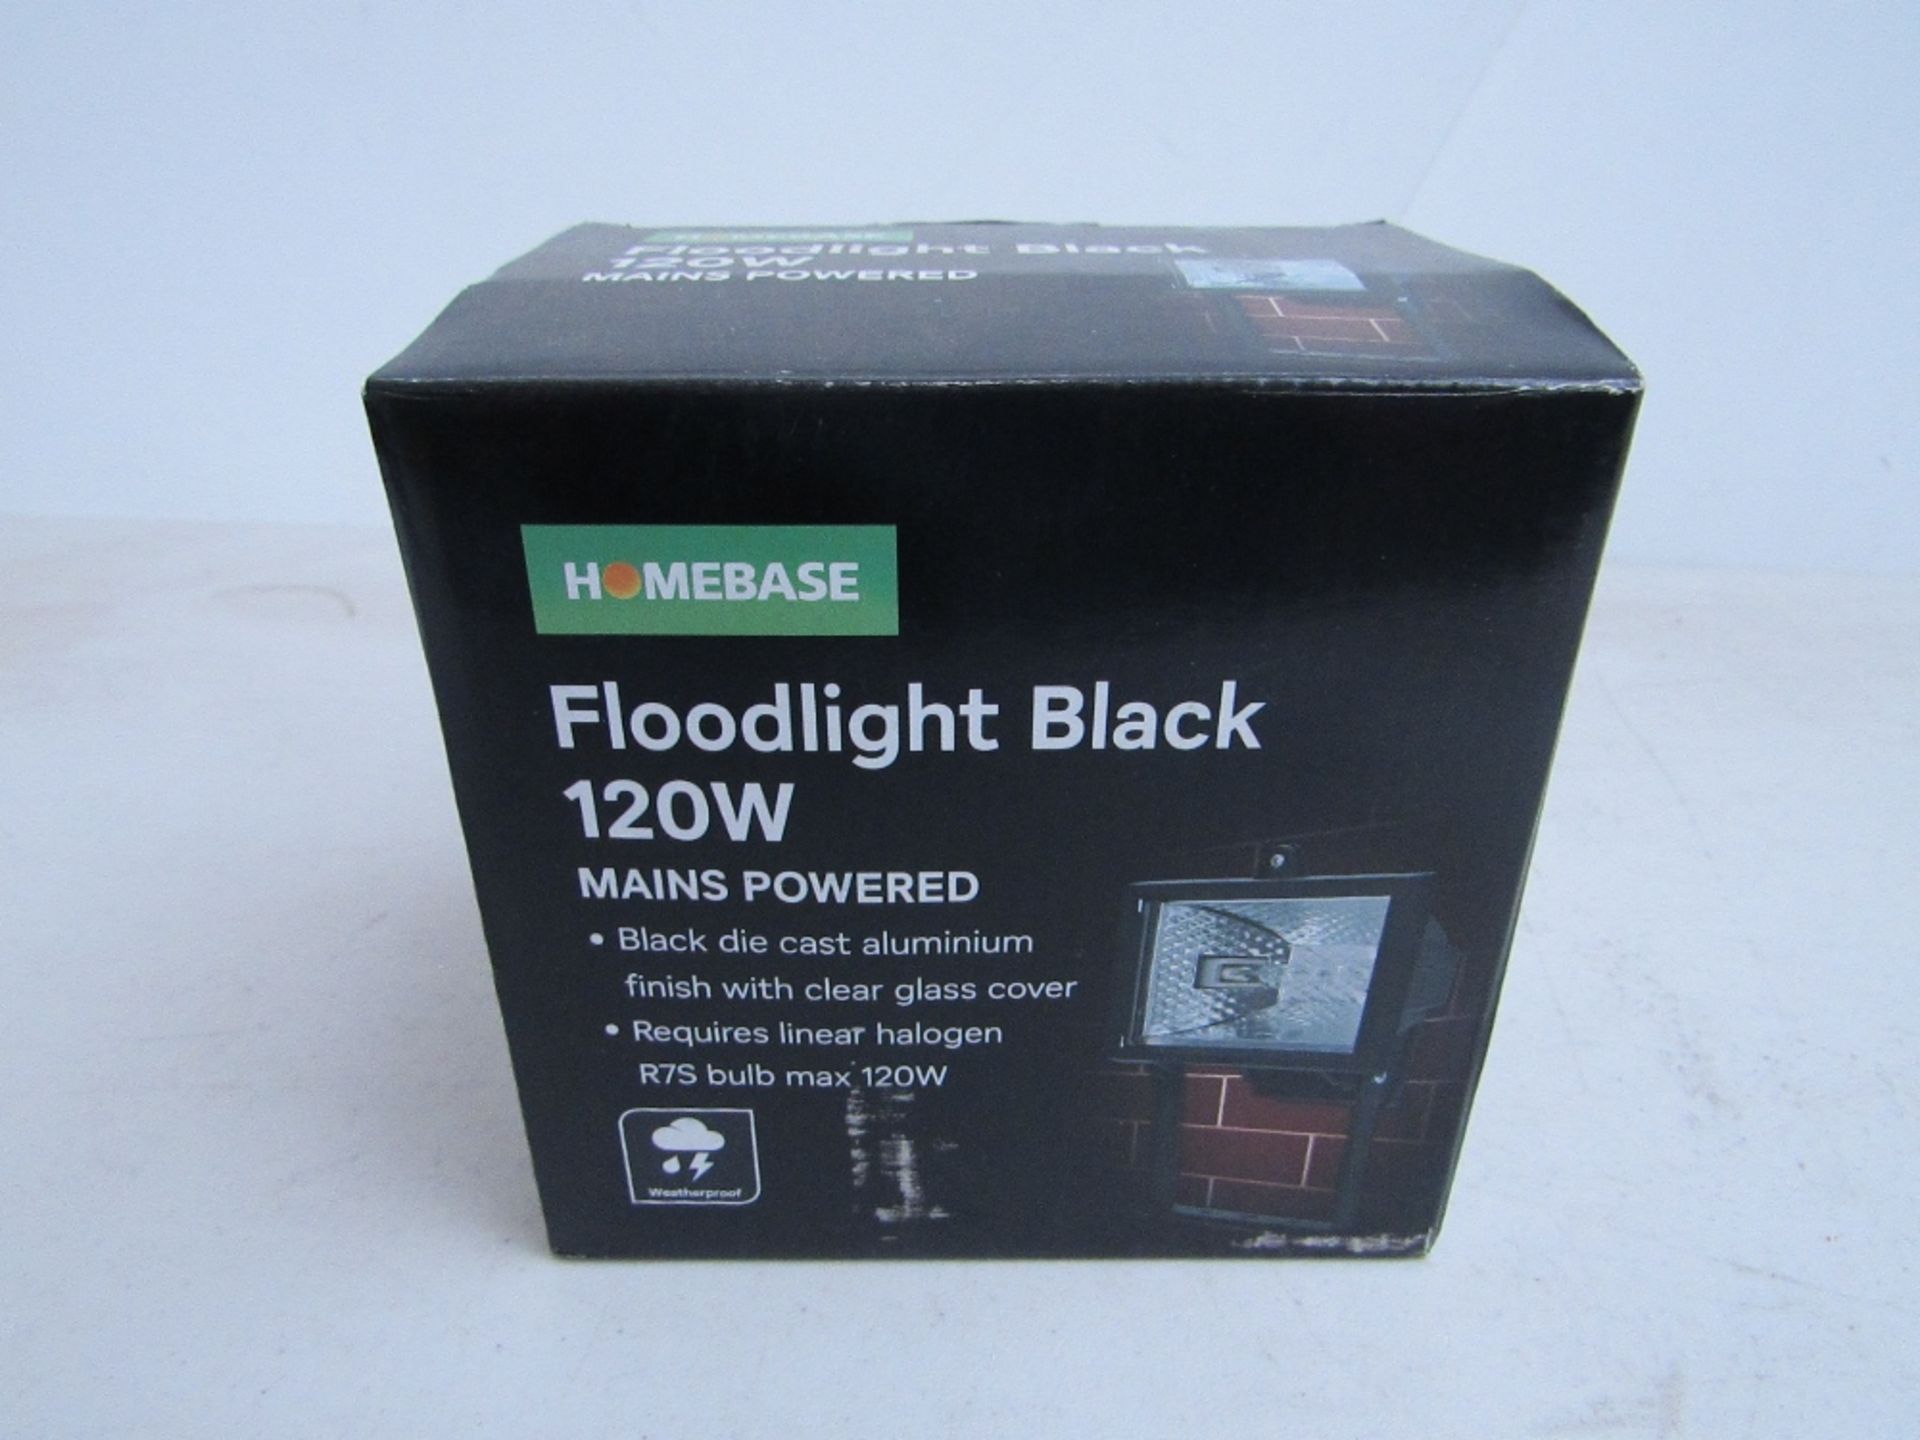 3x HomeBase floodlights - black - 120w (mains powered). All new & boxed.